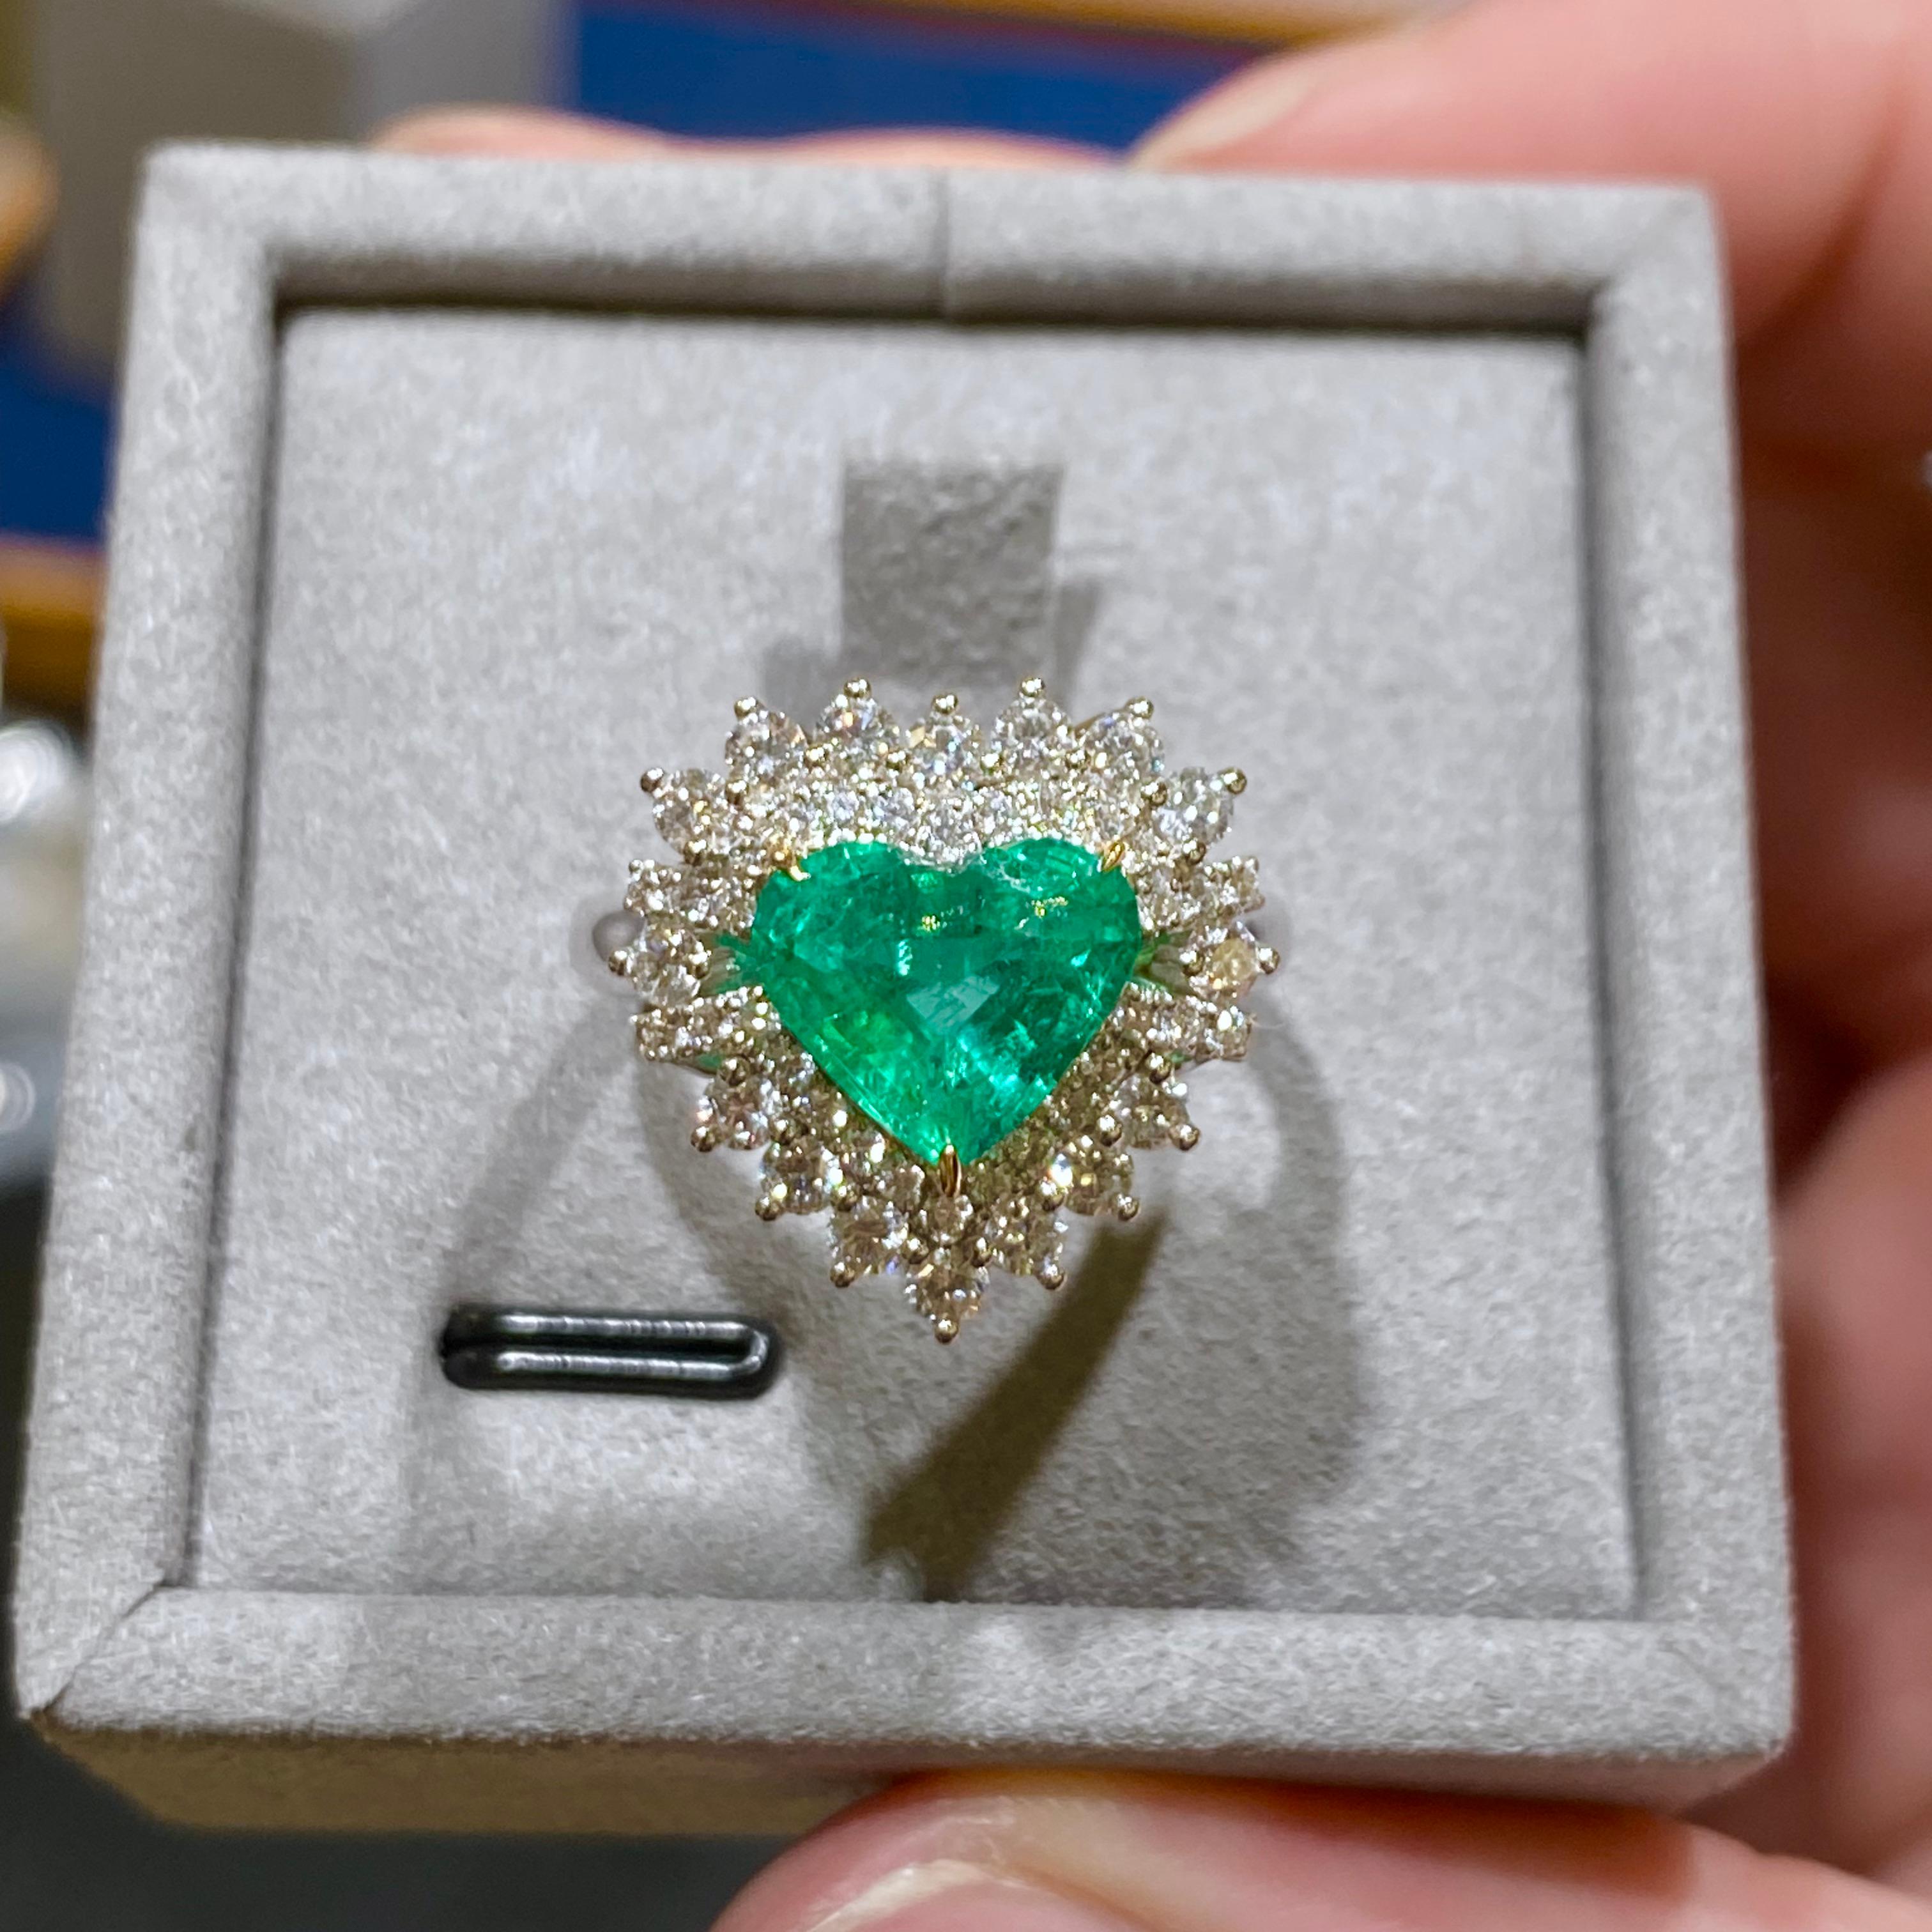 18k gold
Main emerald 1.22ct
Natural diamonds 0.144 ct in vs clarity and E/F colour
Ring is set in 18k white and yellow gold 
total weight is 9.48 gram